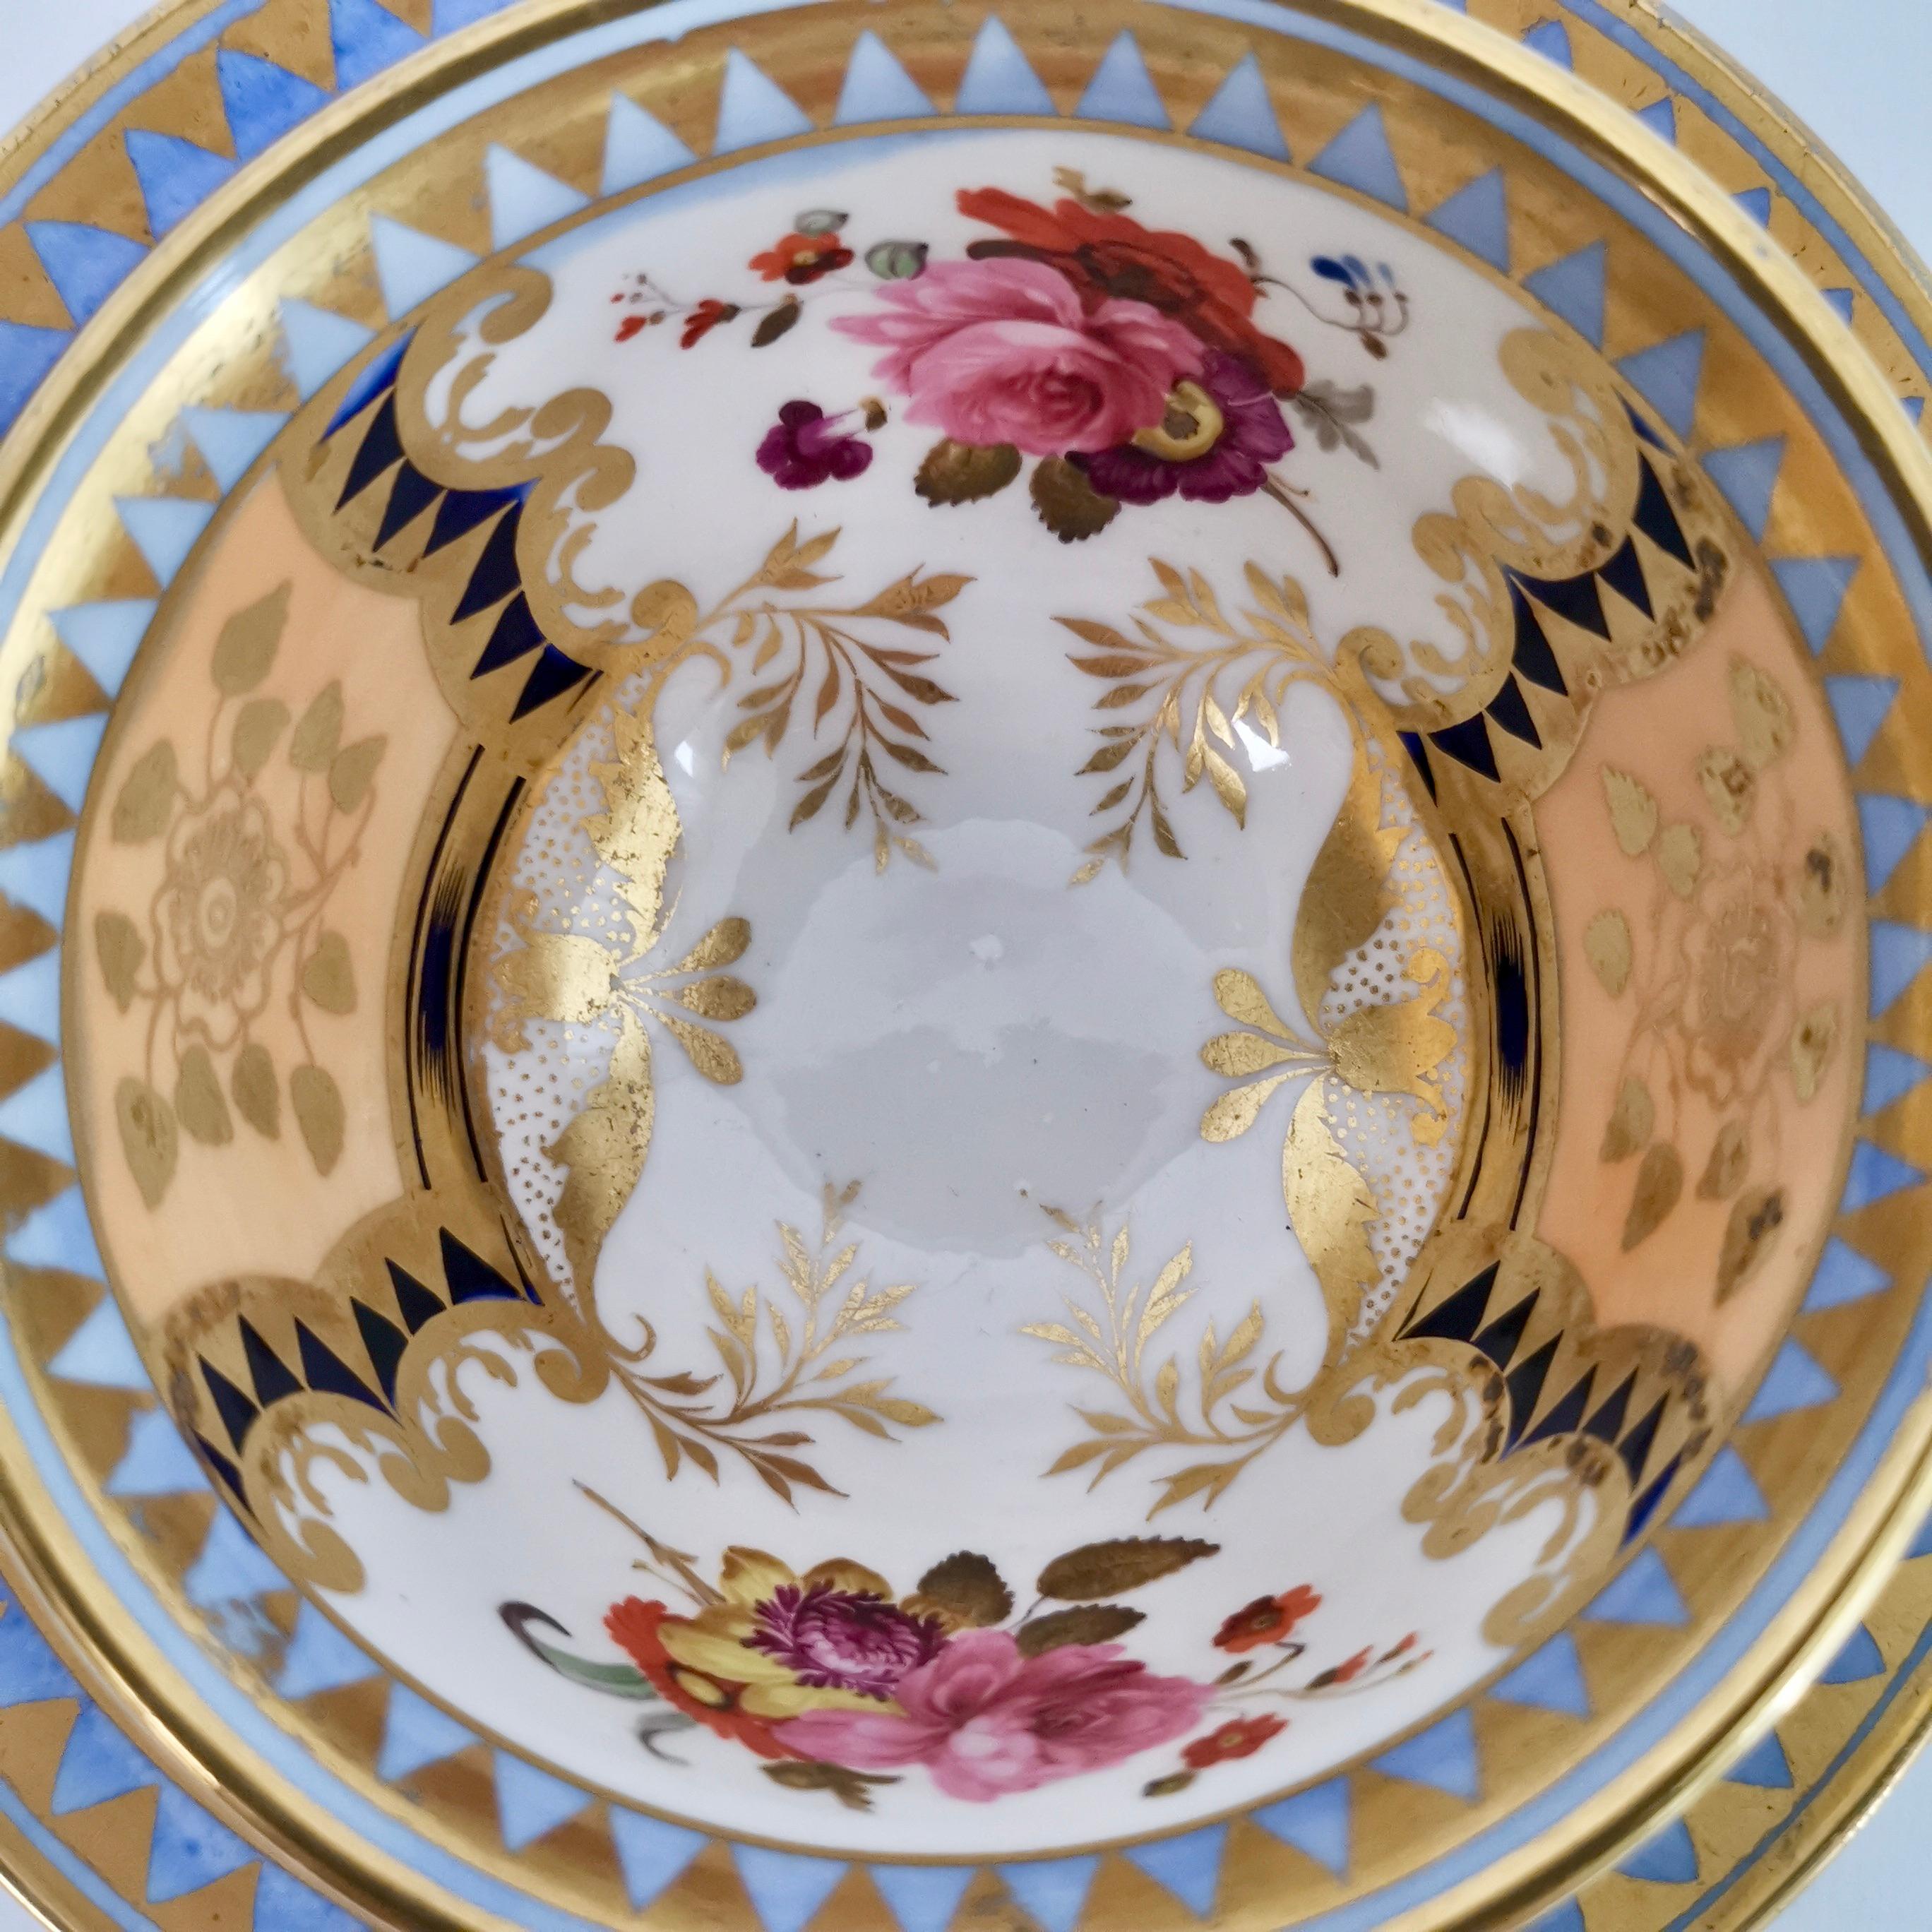 Ridgway Porcelain Teacup, Apricot, Periwinkle and Flowers, Regency circa 1820 2